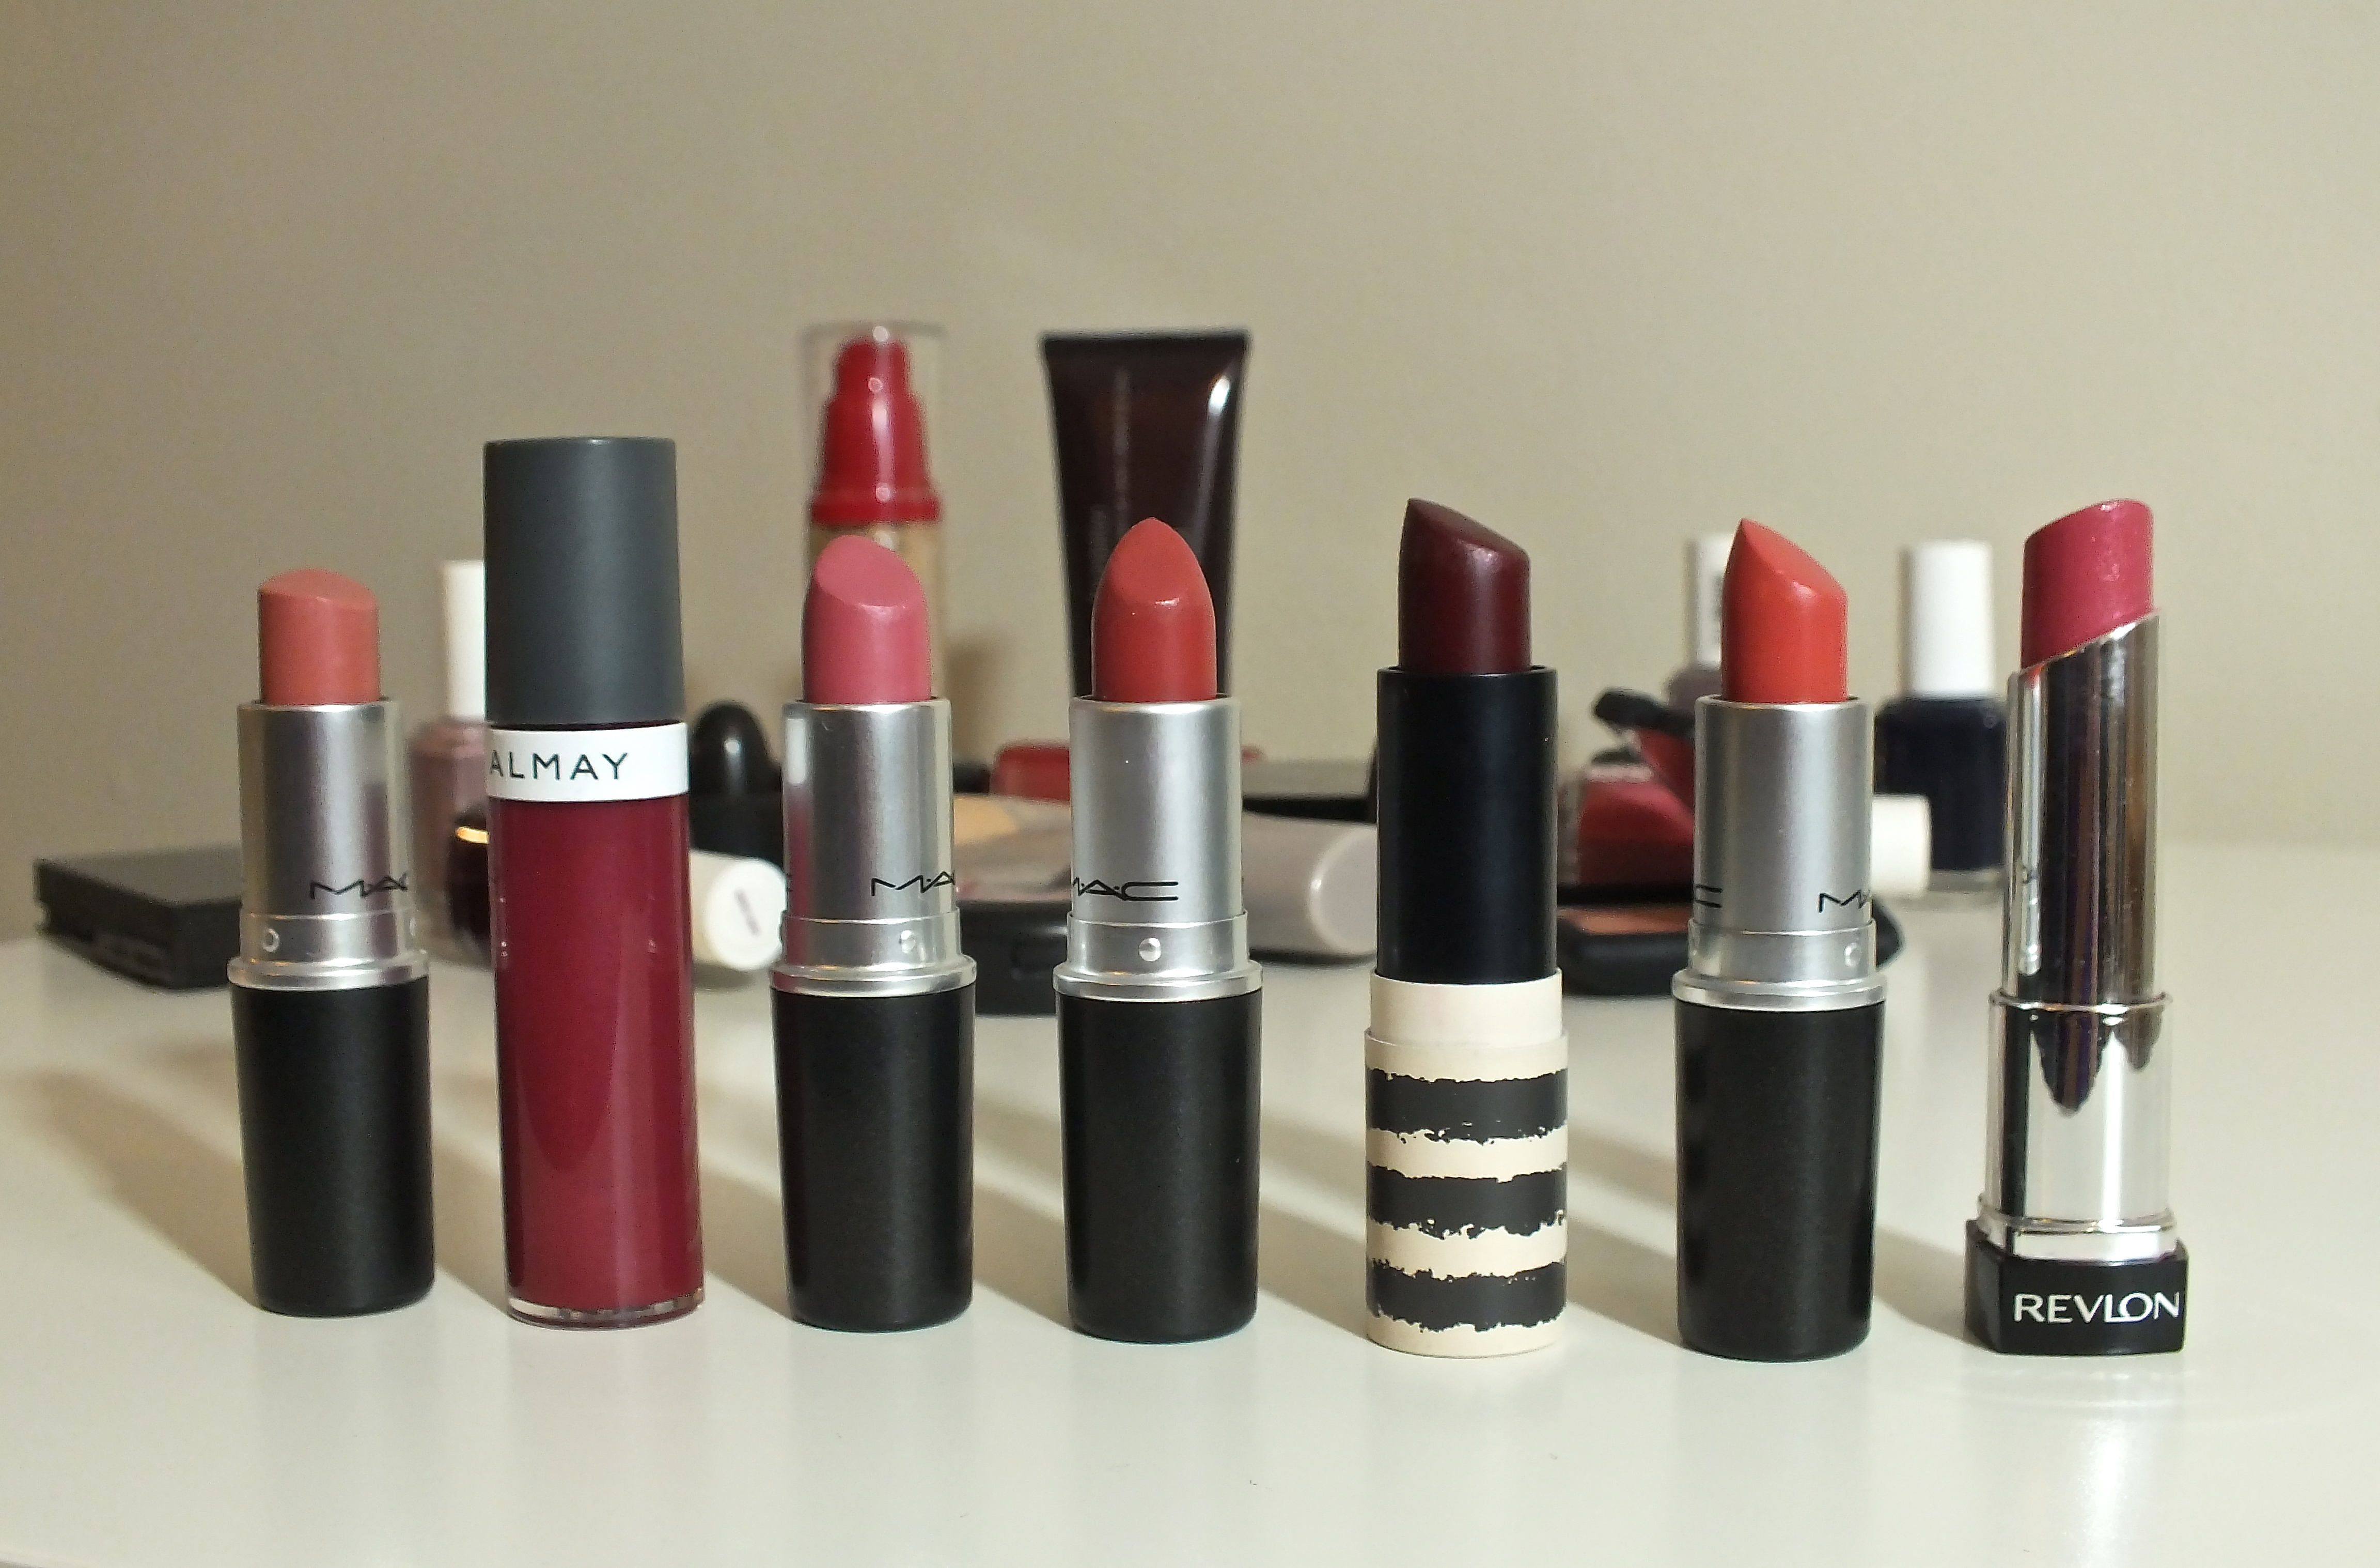 Winter Favourites Roundup 3 Lips Beauty Other Stories